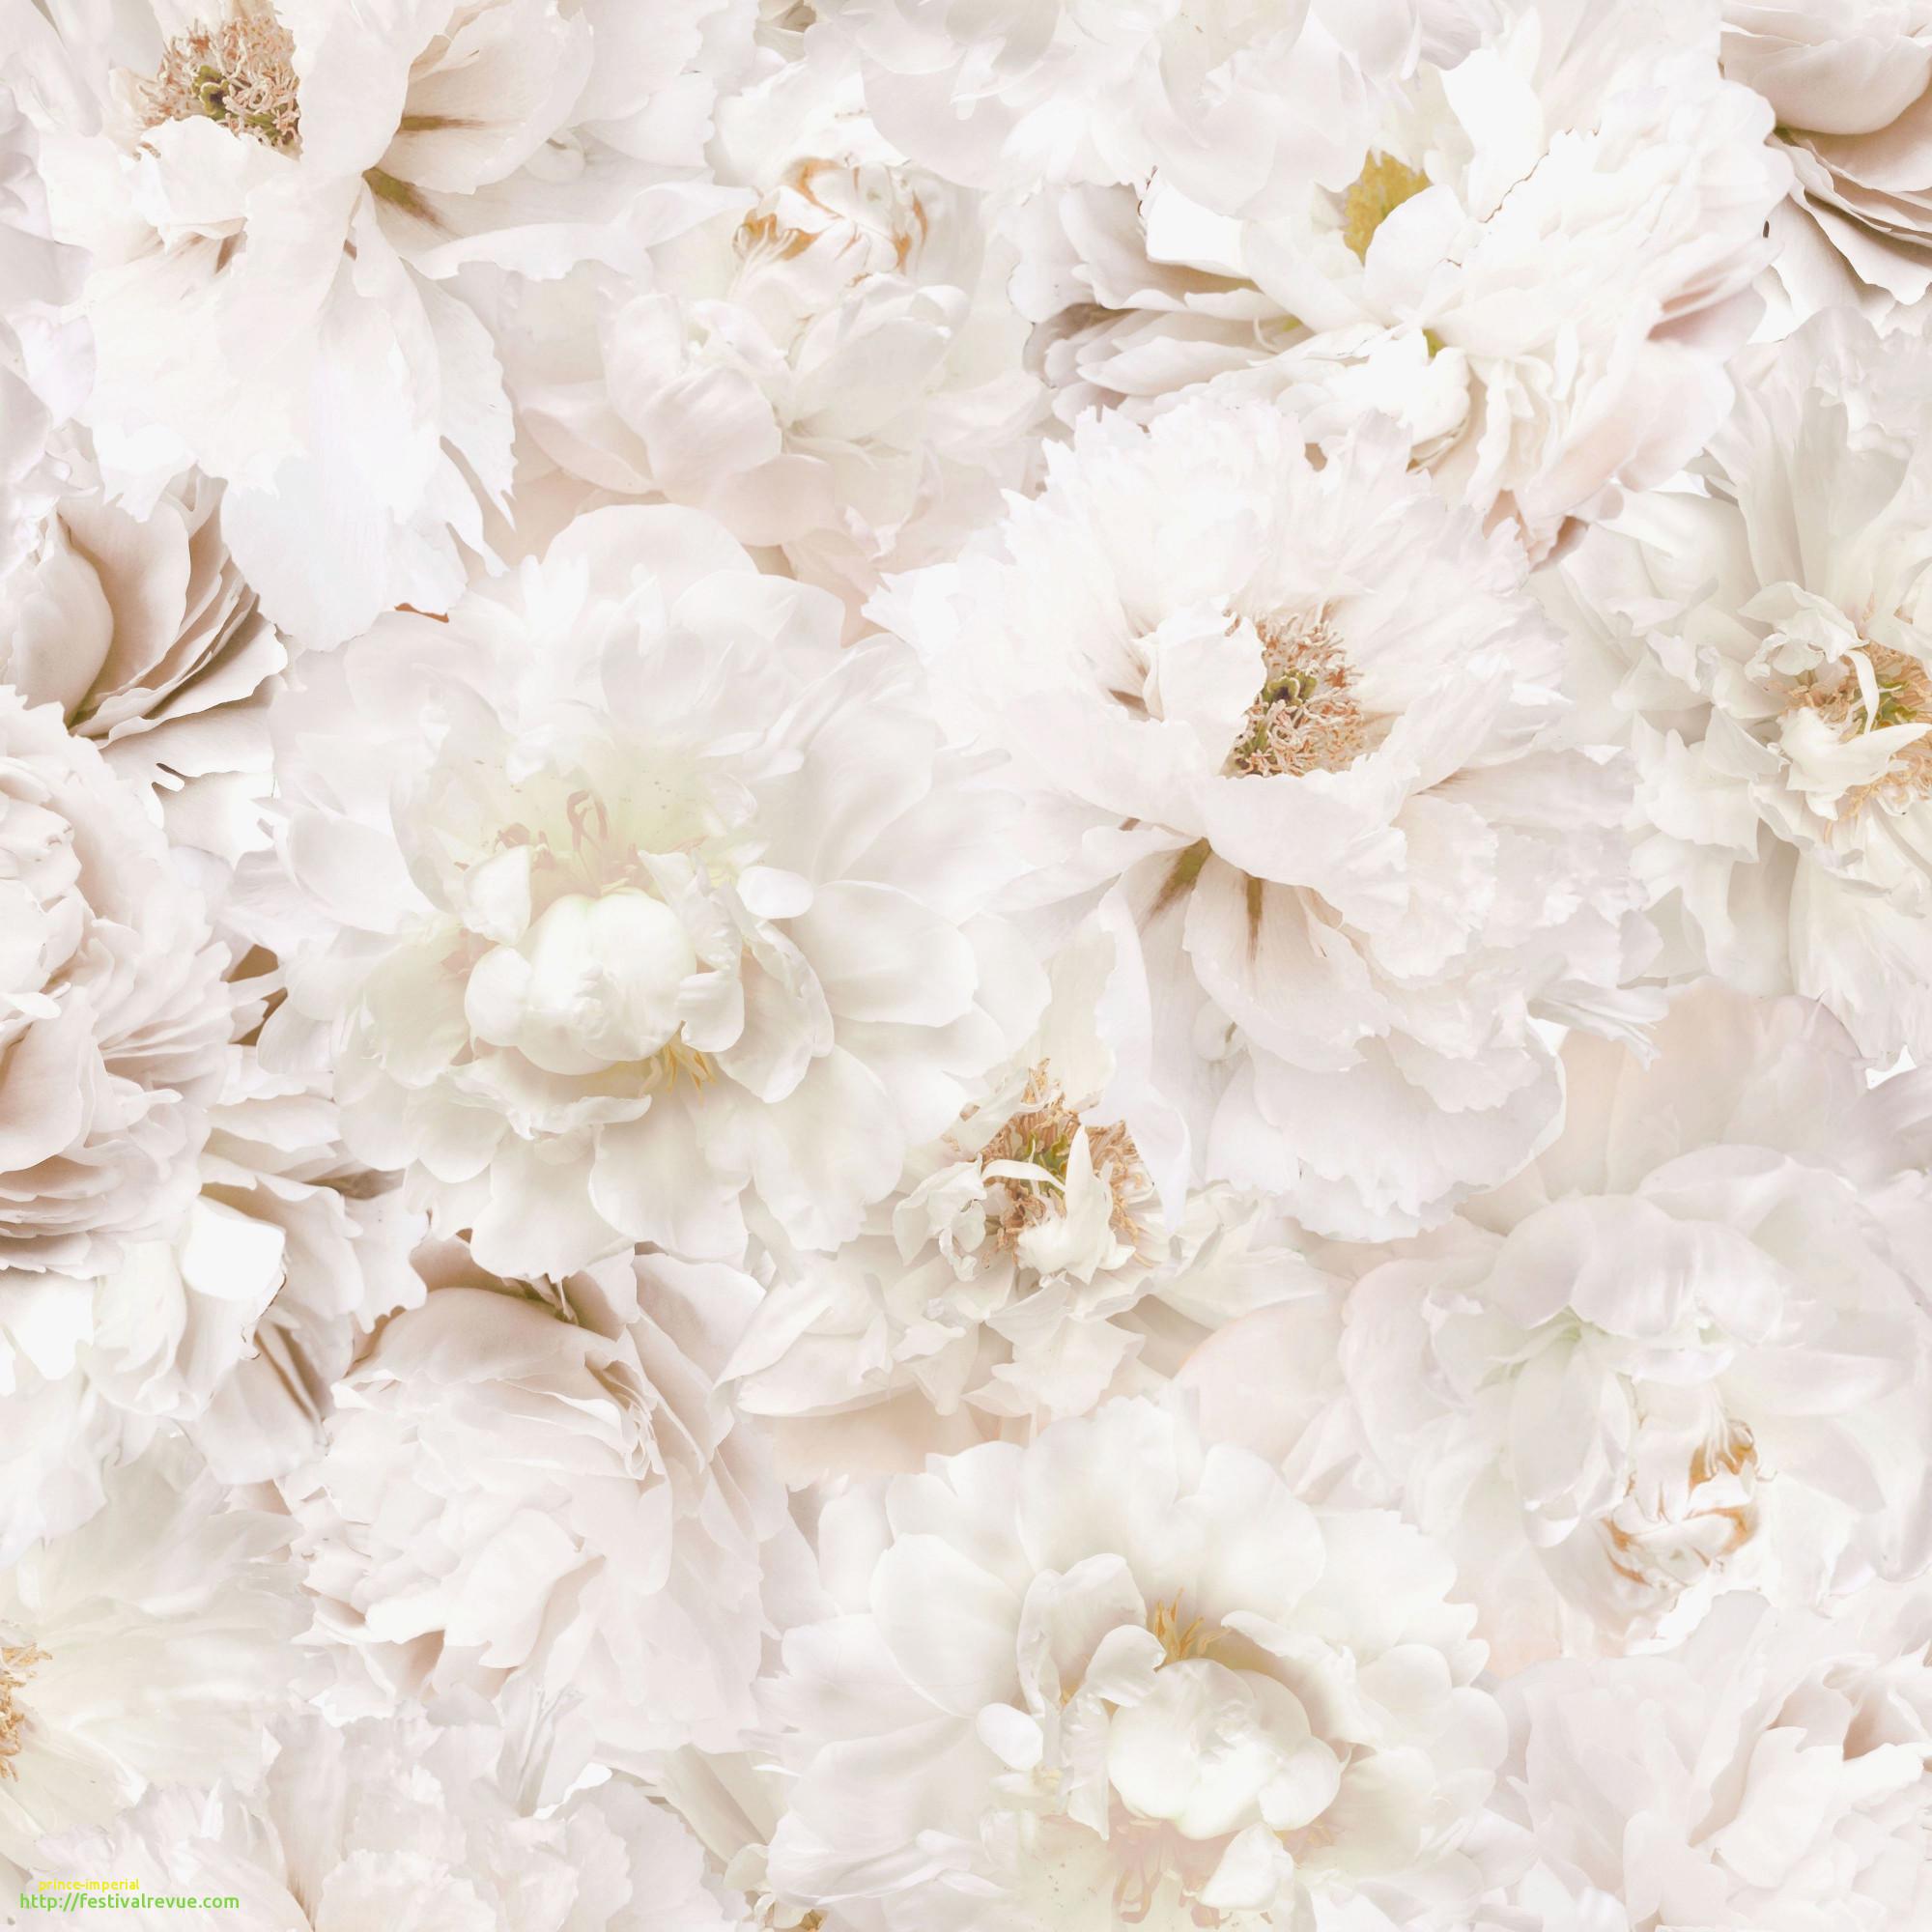 White Paper Flowers Wallpaper On White Background, Spring Summer  Background, Floral Design Elements Stock Photo, Picture and Royalty Free  Image. Image 78497623.